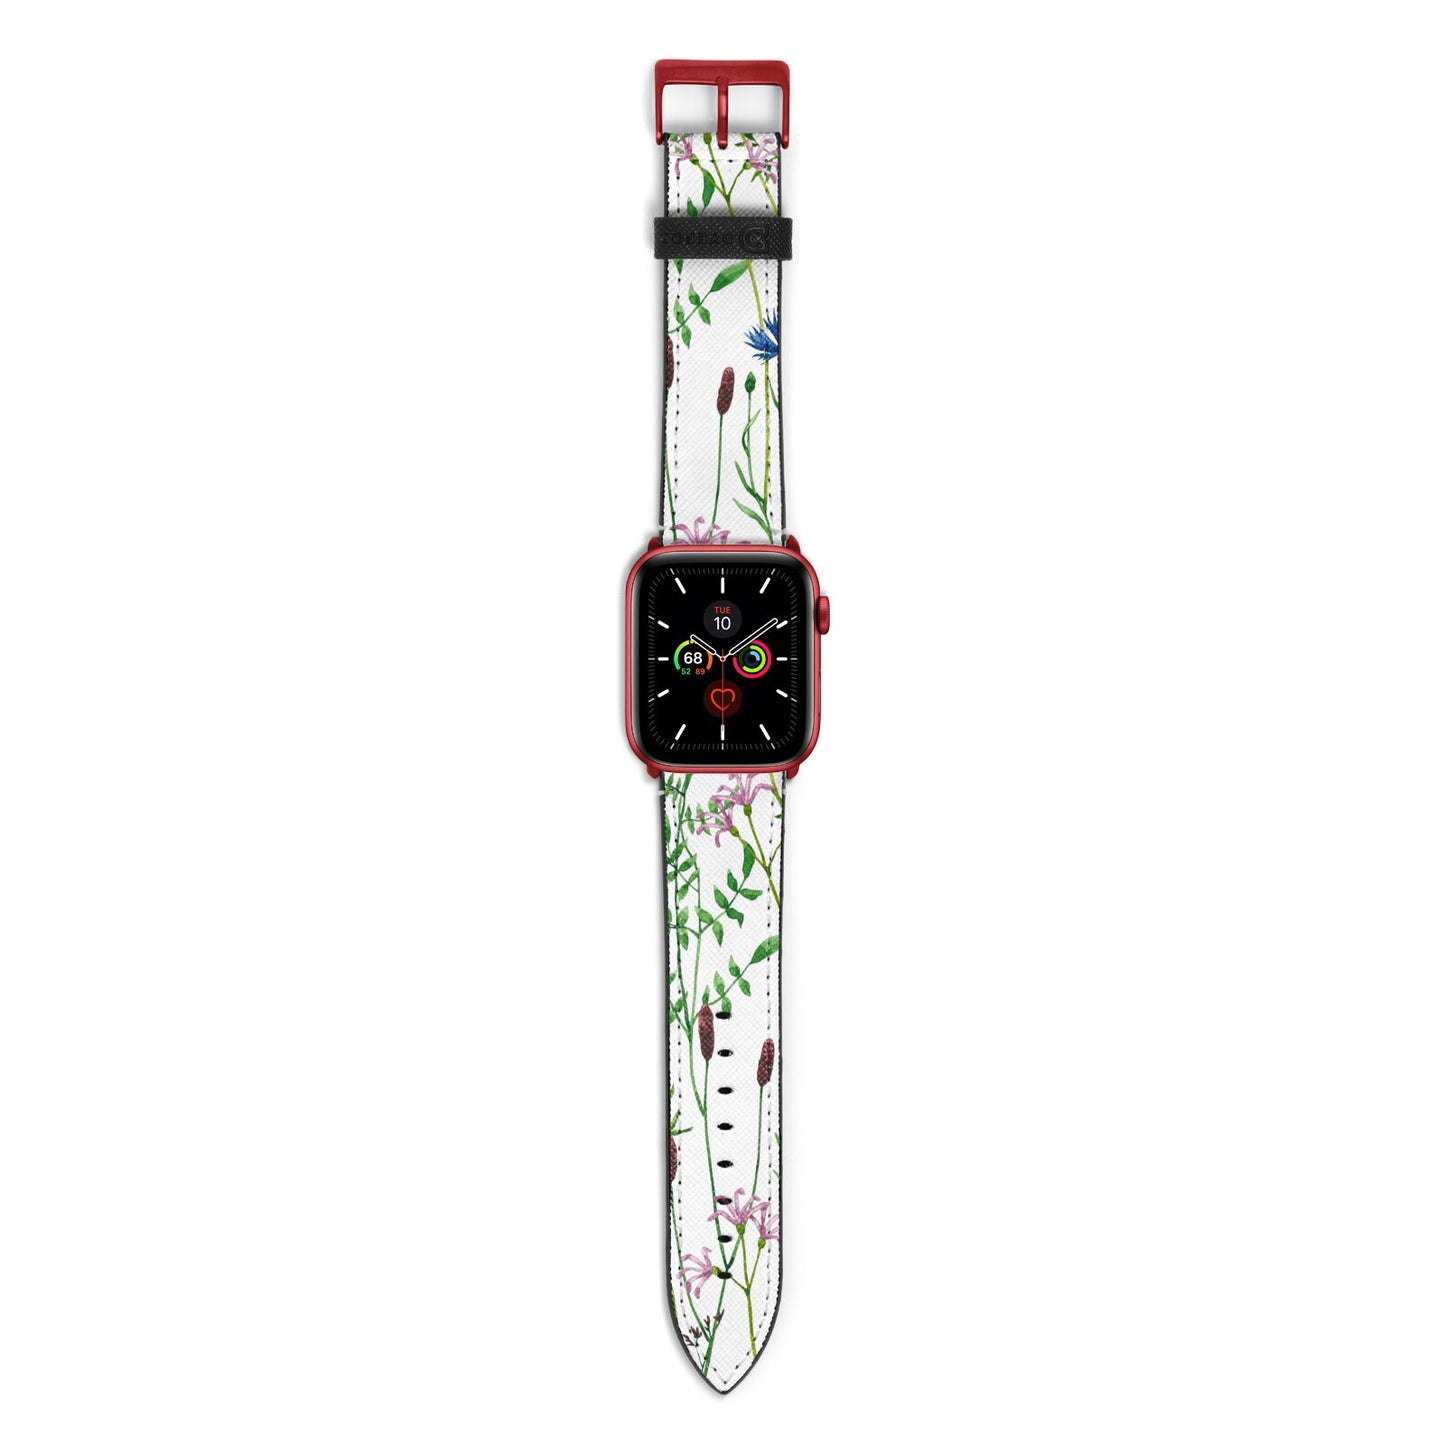 Wildflowers Apple Watch Strap with Red Hardware